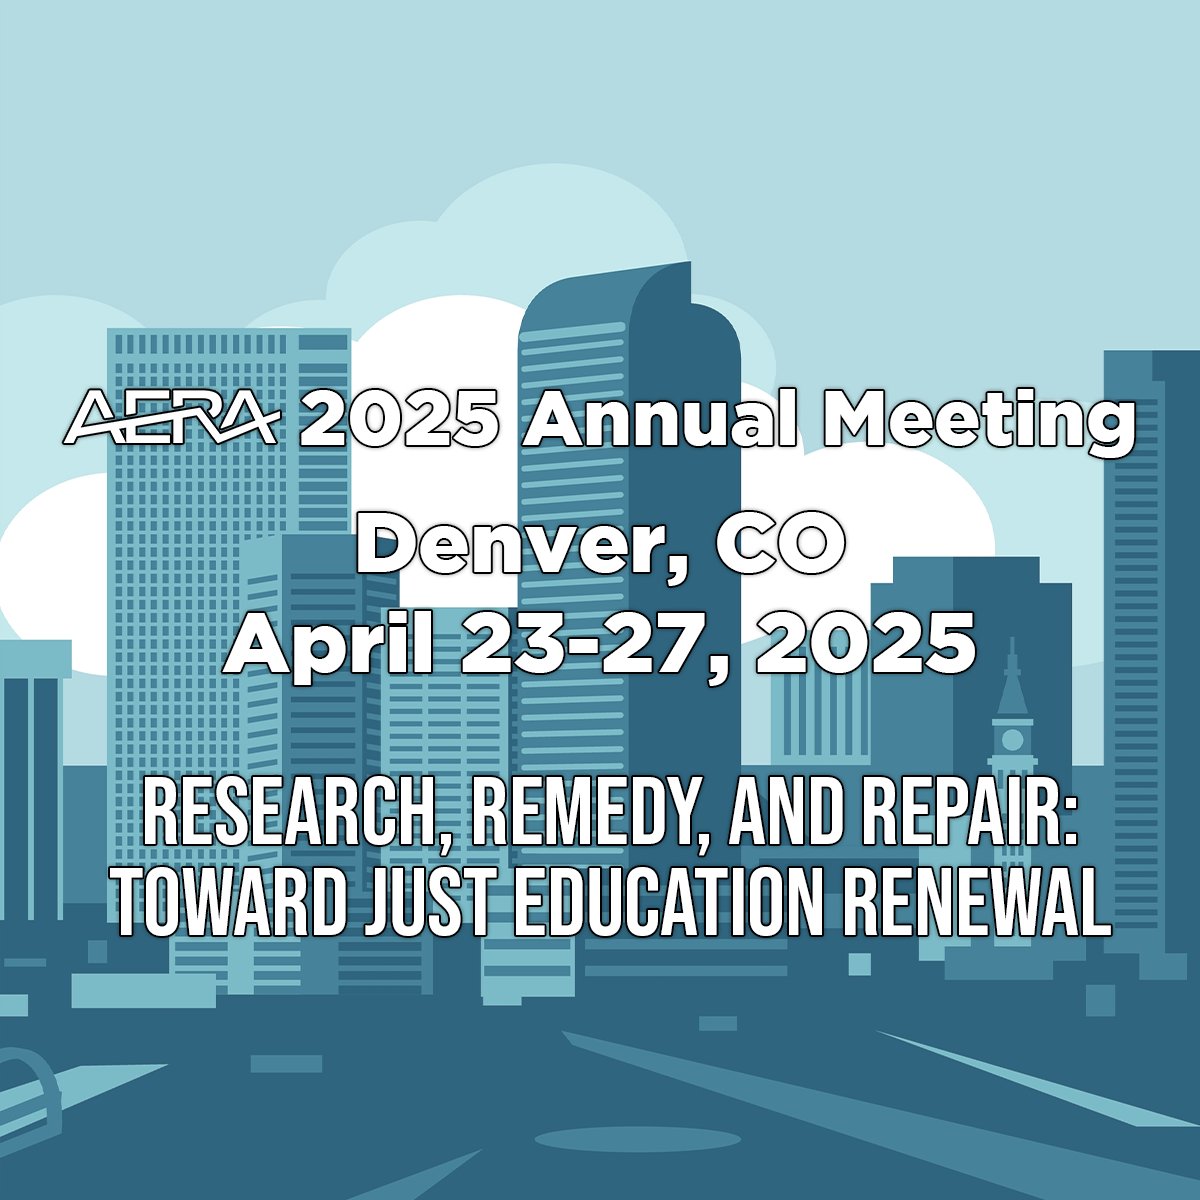 The Call for Submissions for the 2025 AERA Annual Meeting is now open. The deadline for submissions is July 26 at 11:59 p.m. PT. Read the call here: aera.net/Events-Meeting…